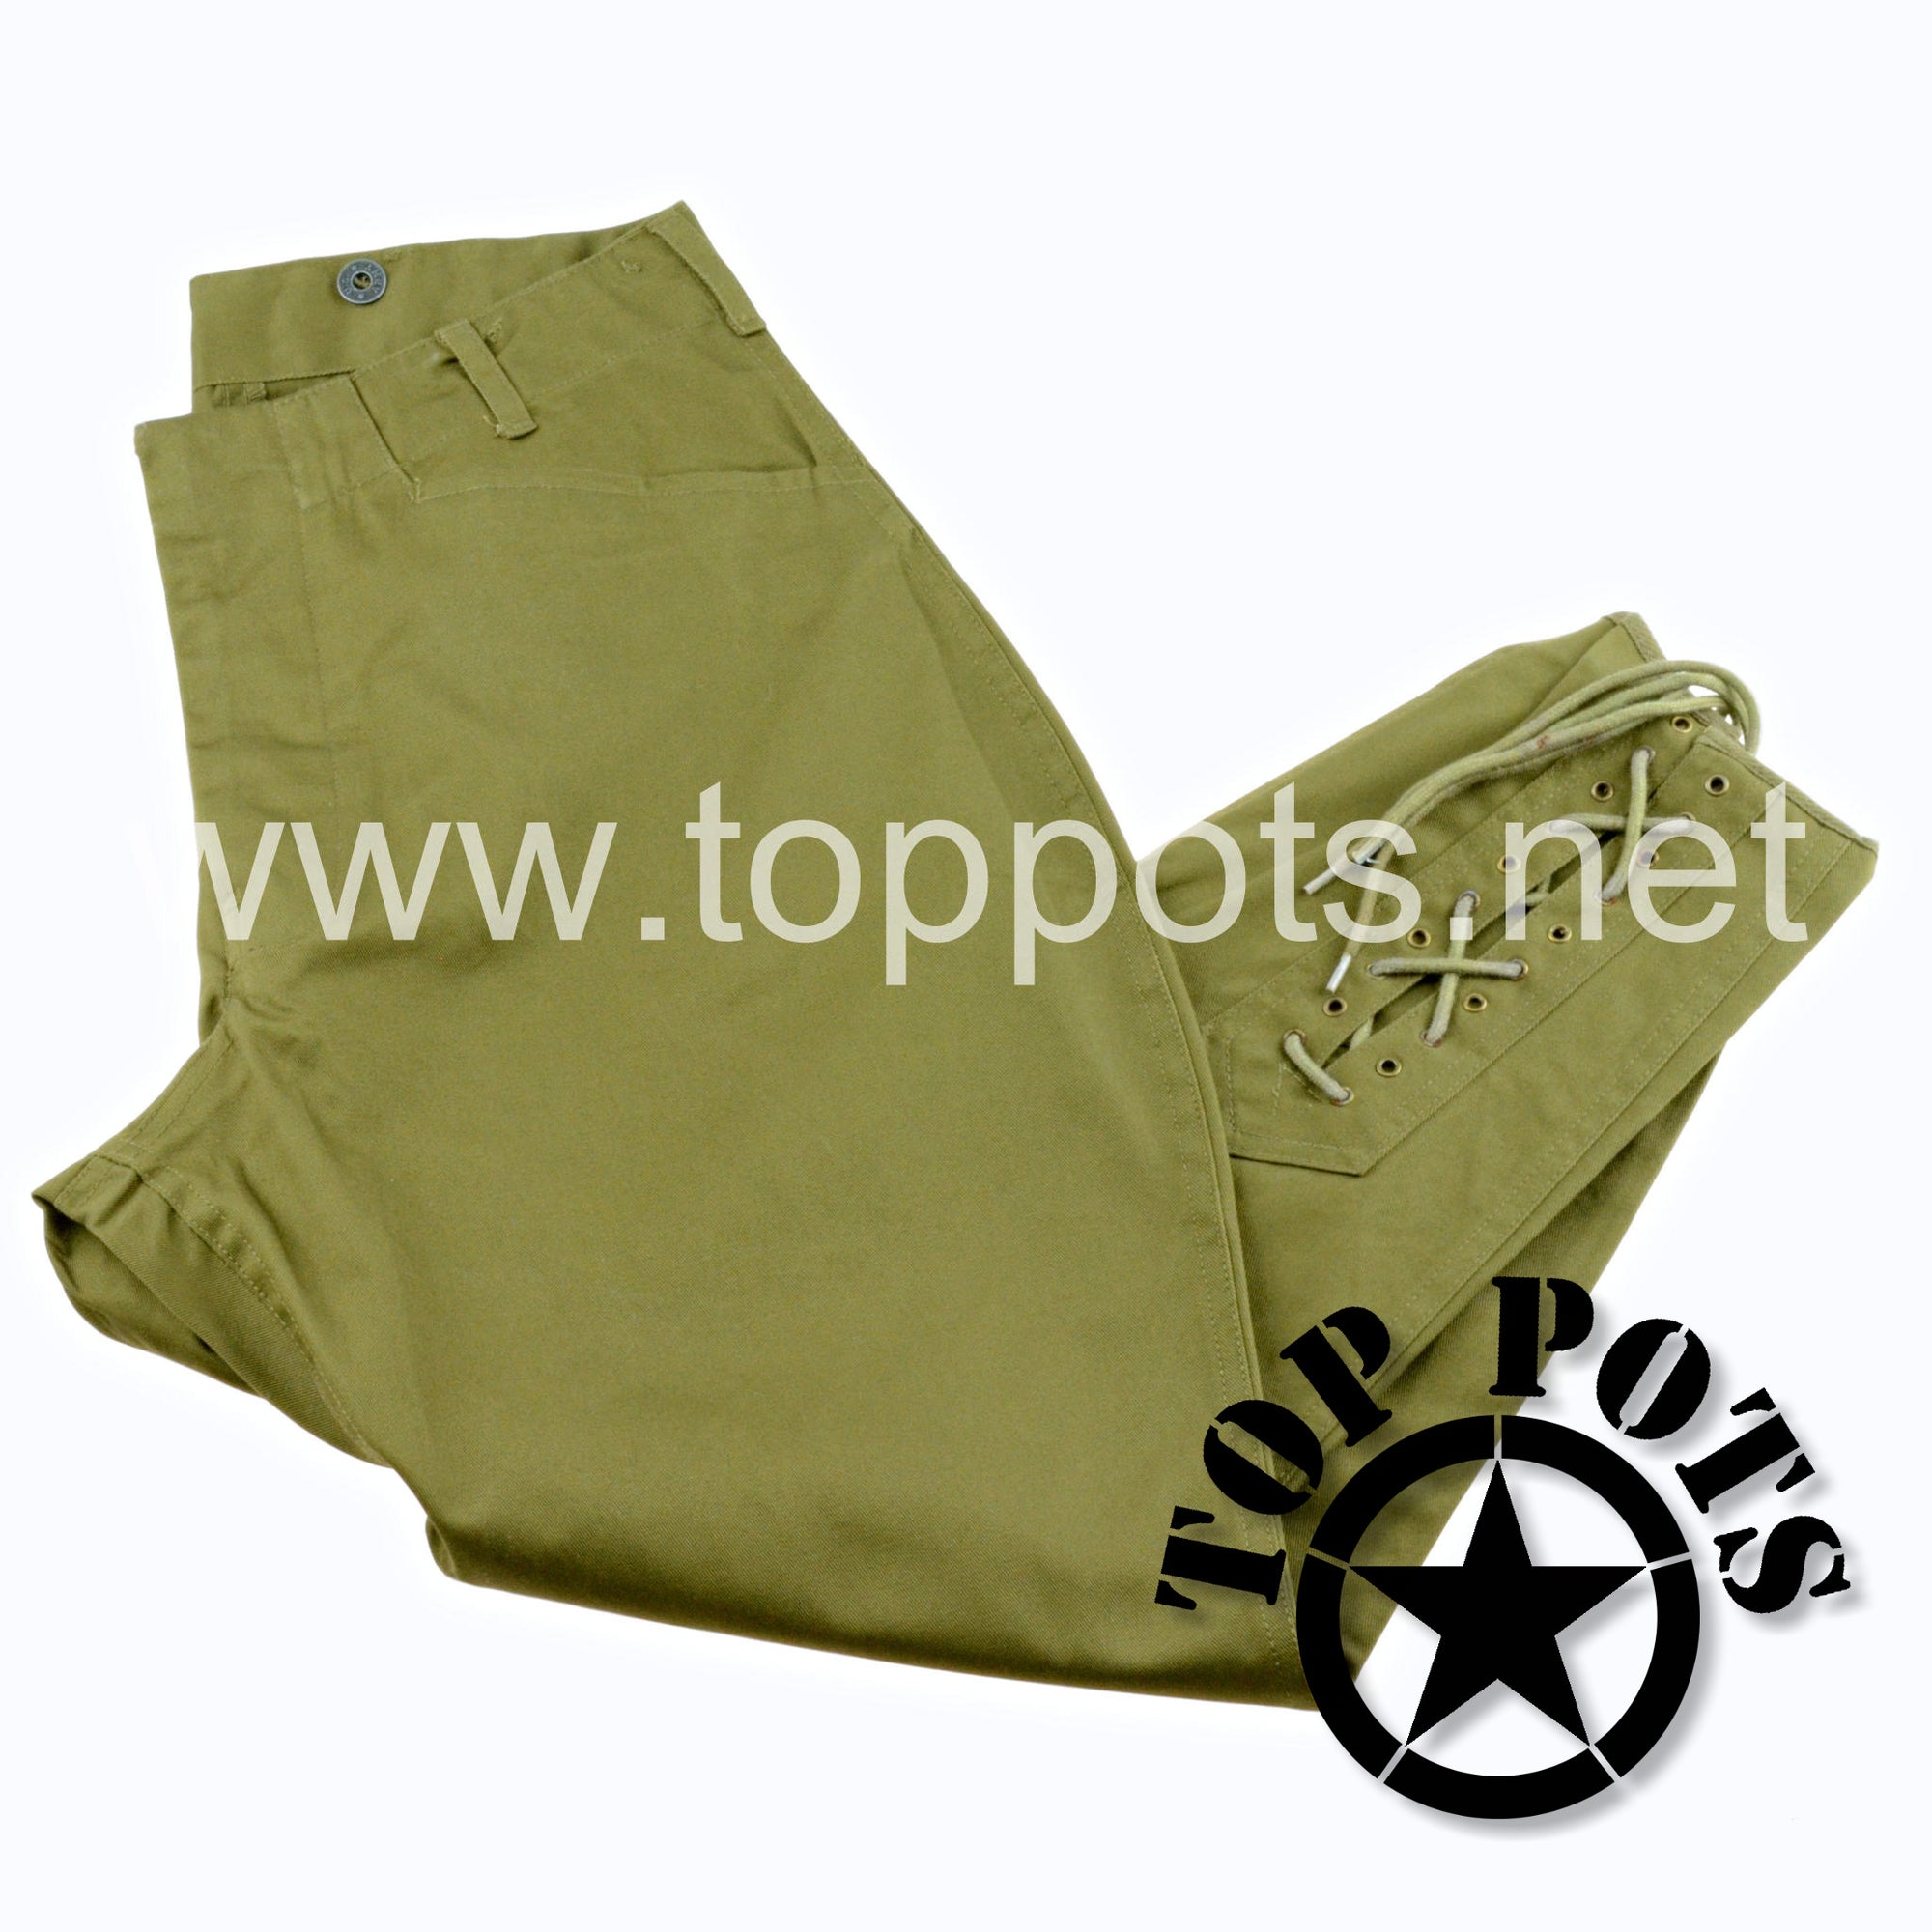 WWI US Army Reproduction American Doughboy M1912 Cotton Enlisted Summer Uniform Olive Drab Trouser Pant Breeches